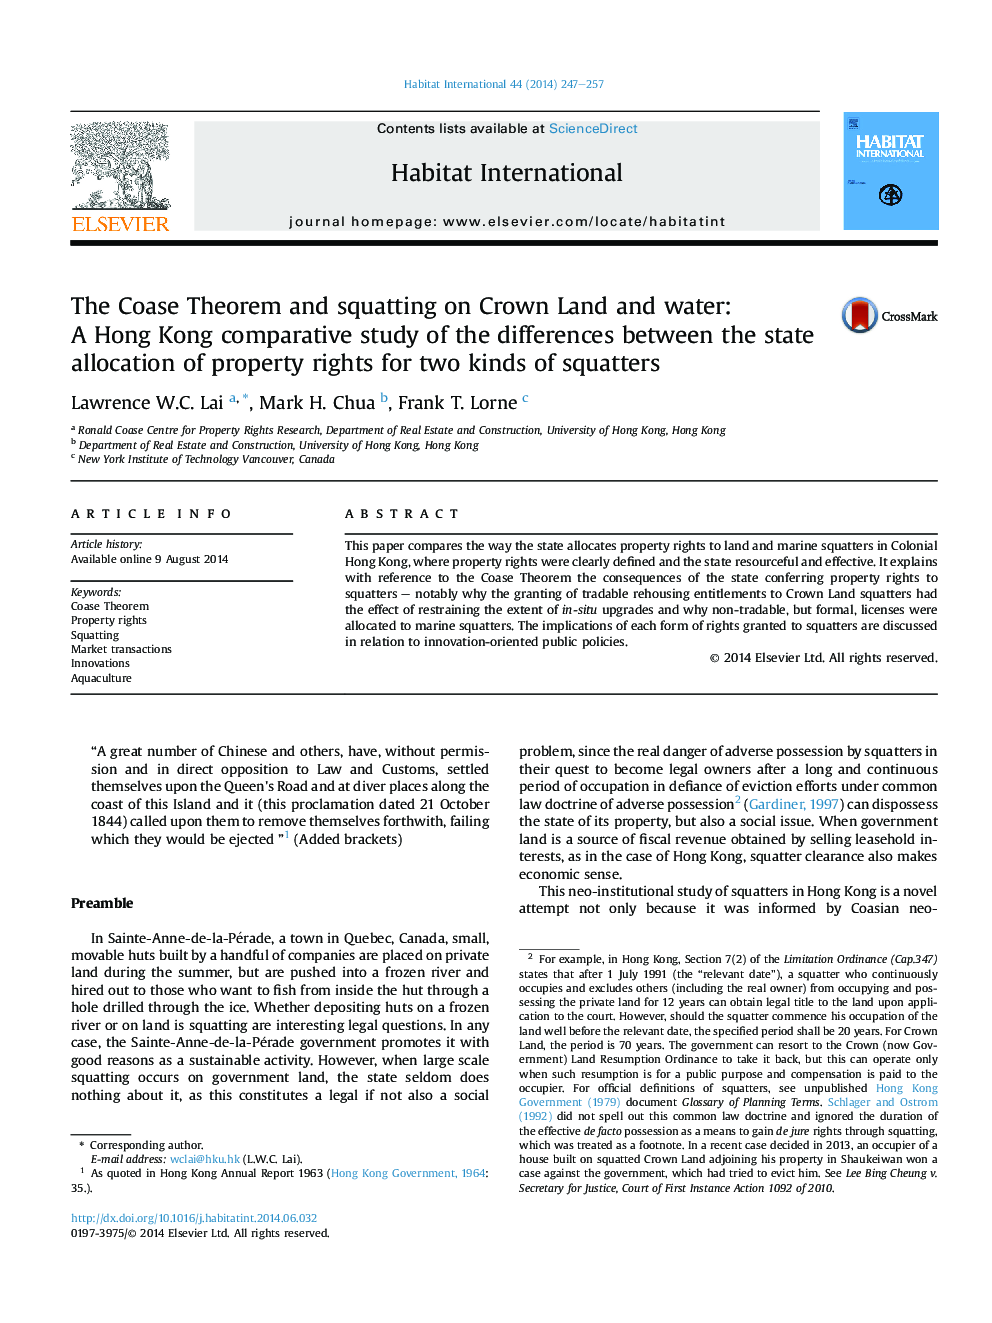 The Coase Theorem and squatting on Crown Land and water: A Hong Kong comparative study of the differences between the state allocation of property rights for two kinds of squatters